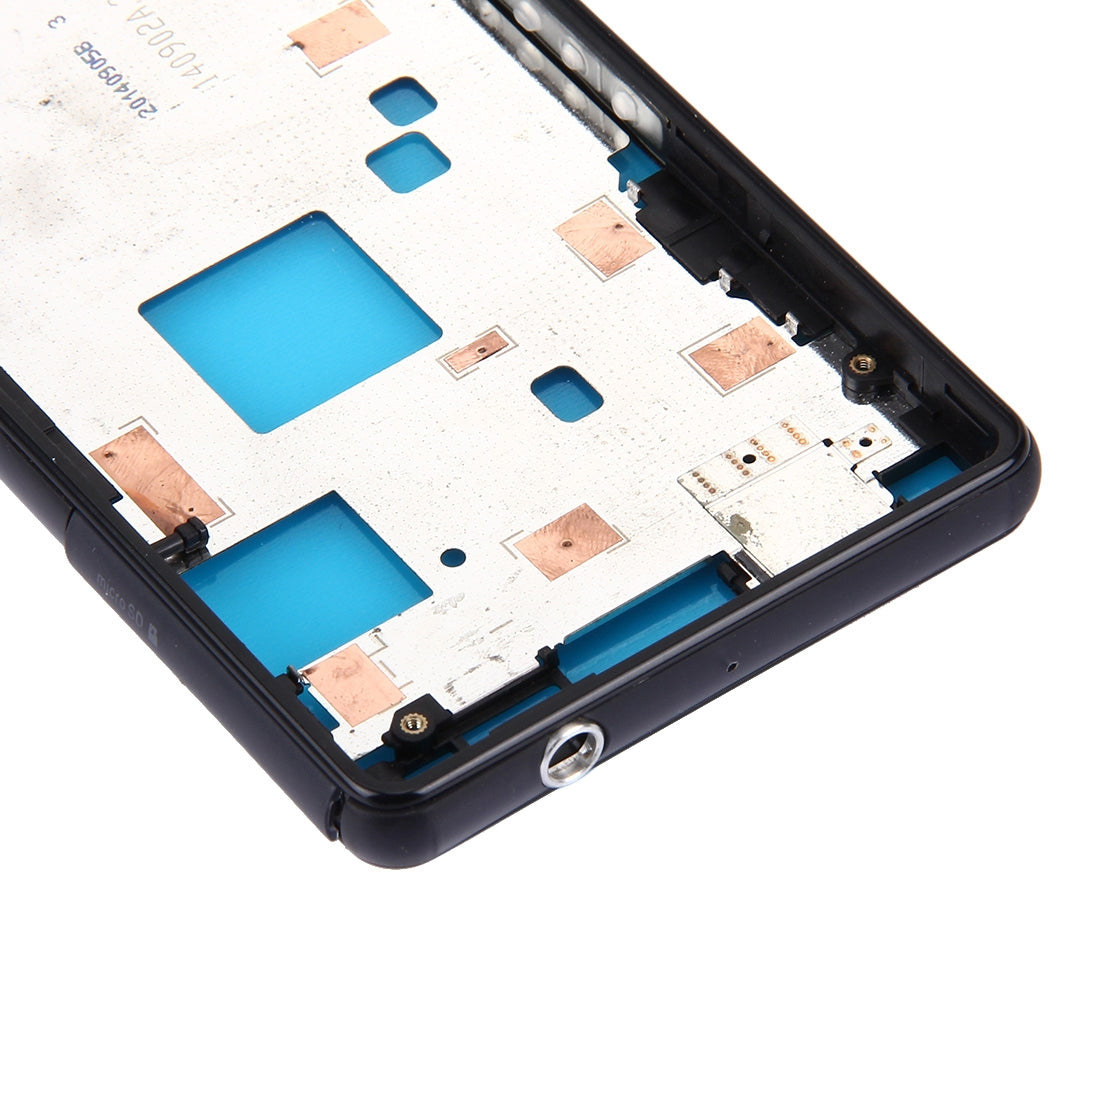 Chassis Intermediate Frame LCD Sony Xperia Z3 Compact / D5803 / D5833 Black